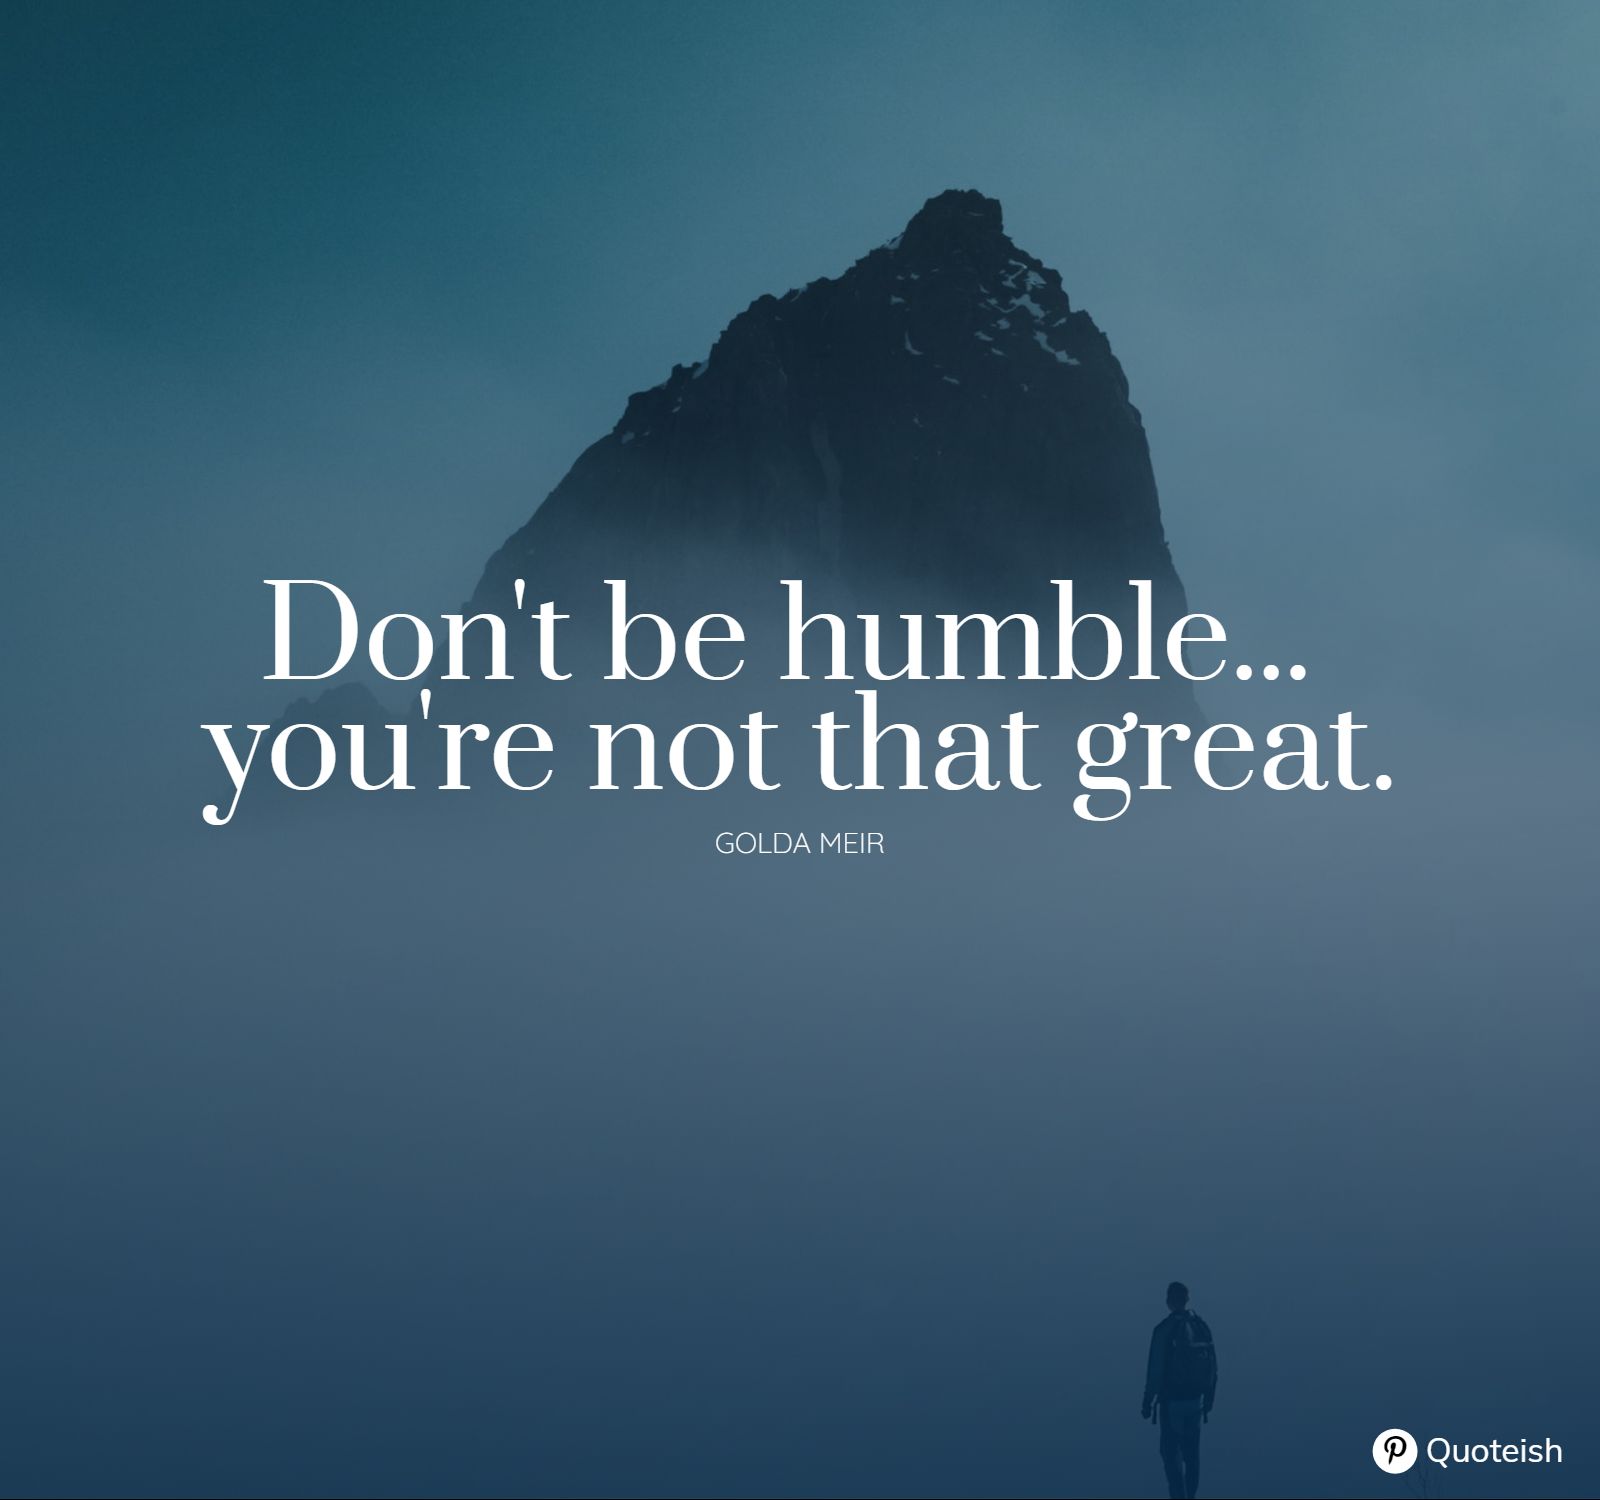 52+ Being Humble Quotes And Captions: Stay Down To Earth - QUOTEISH